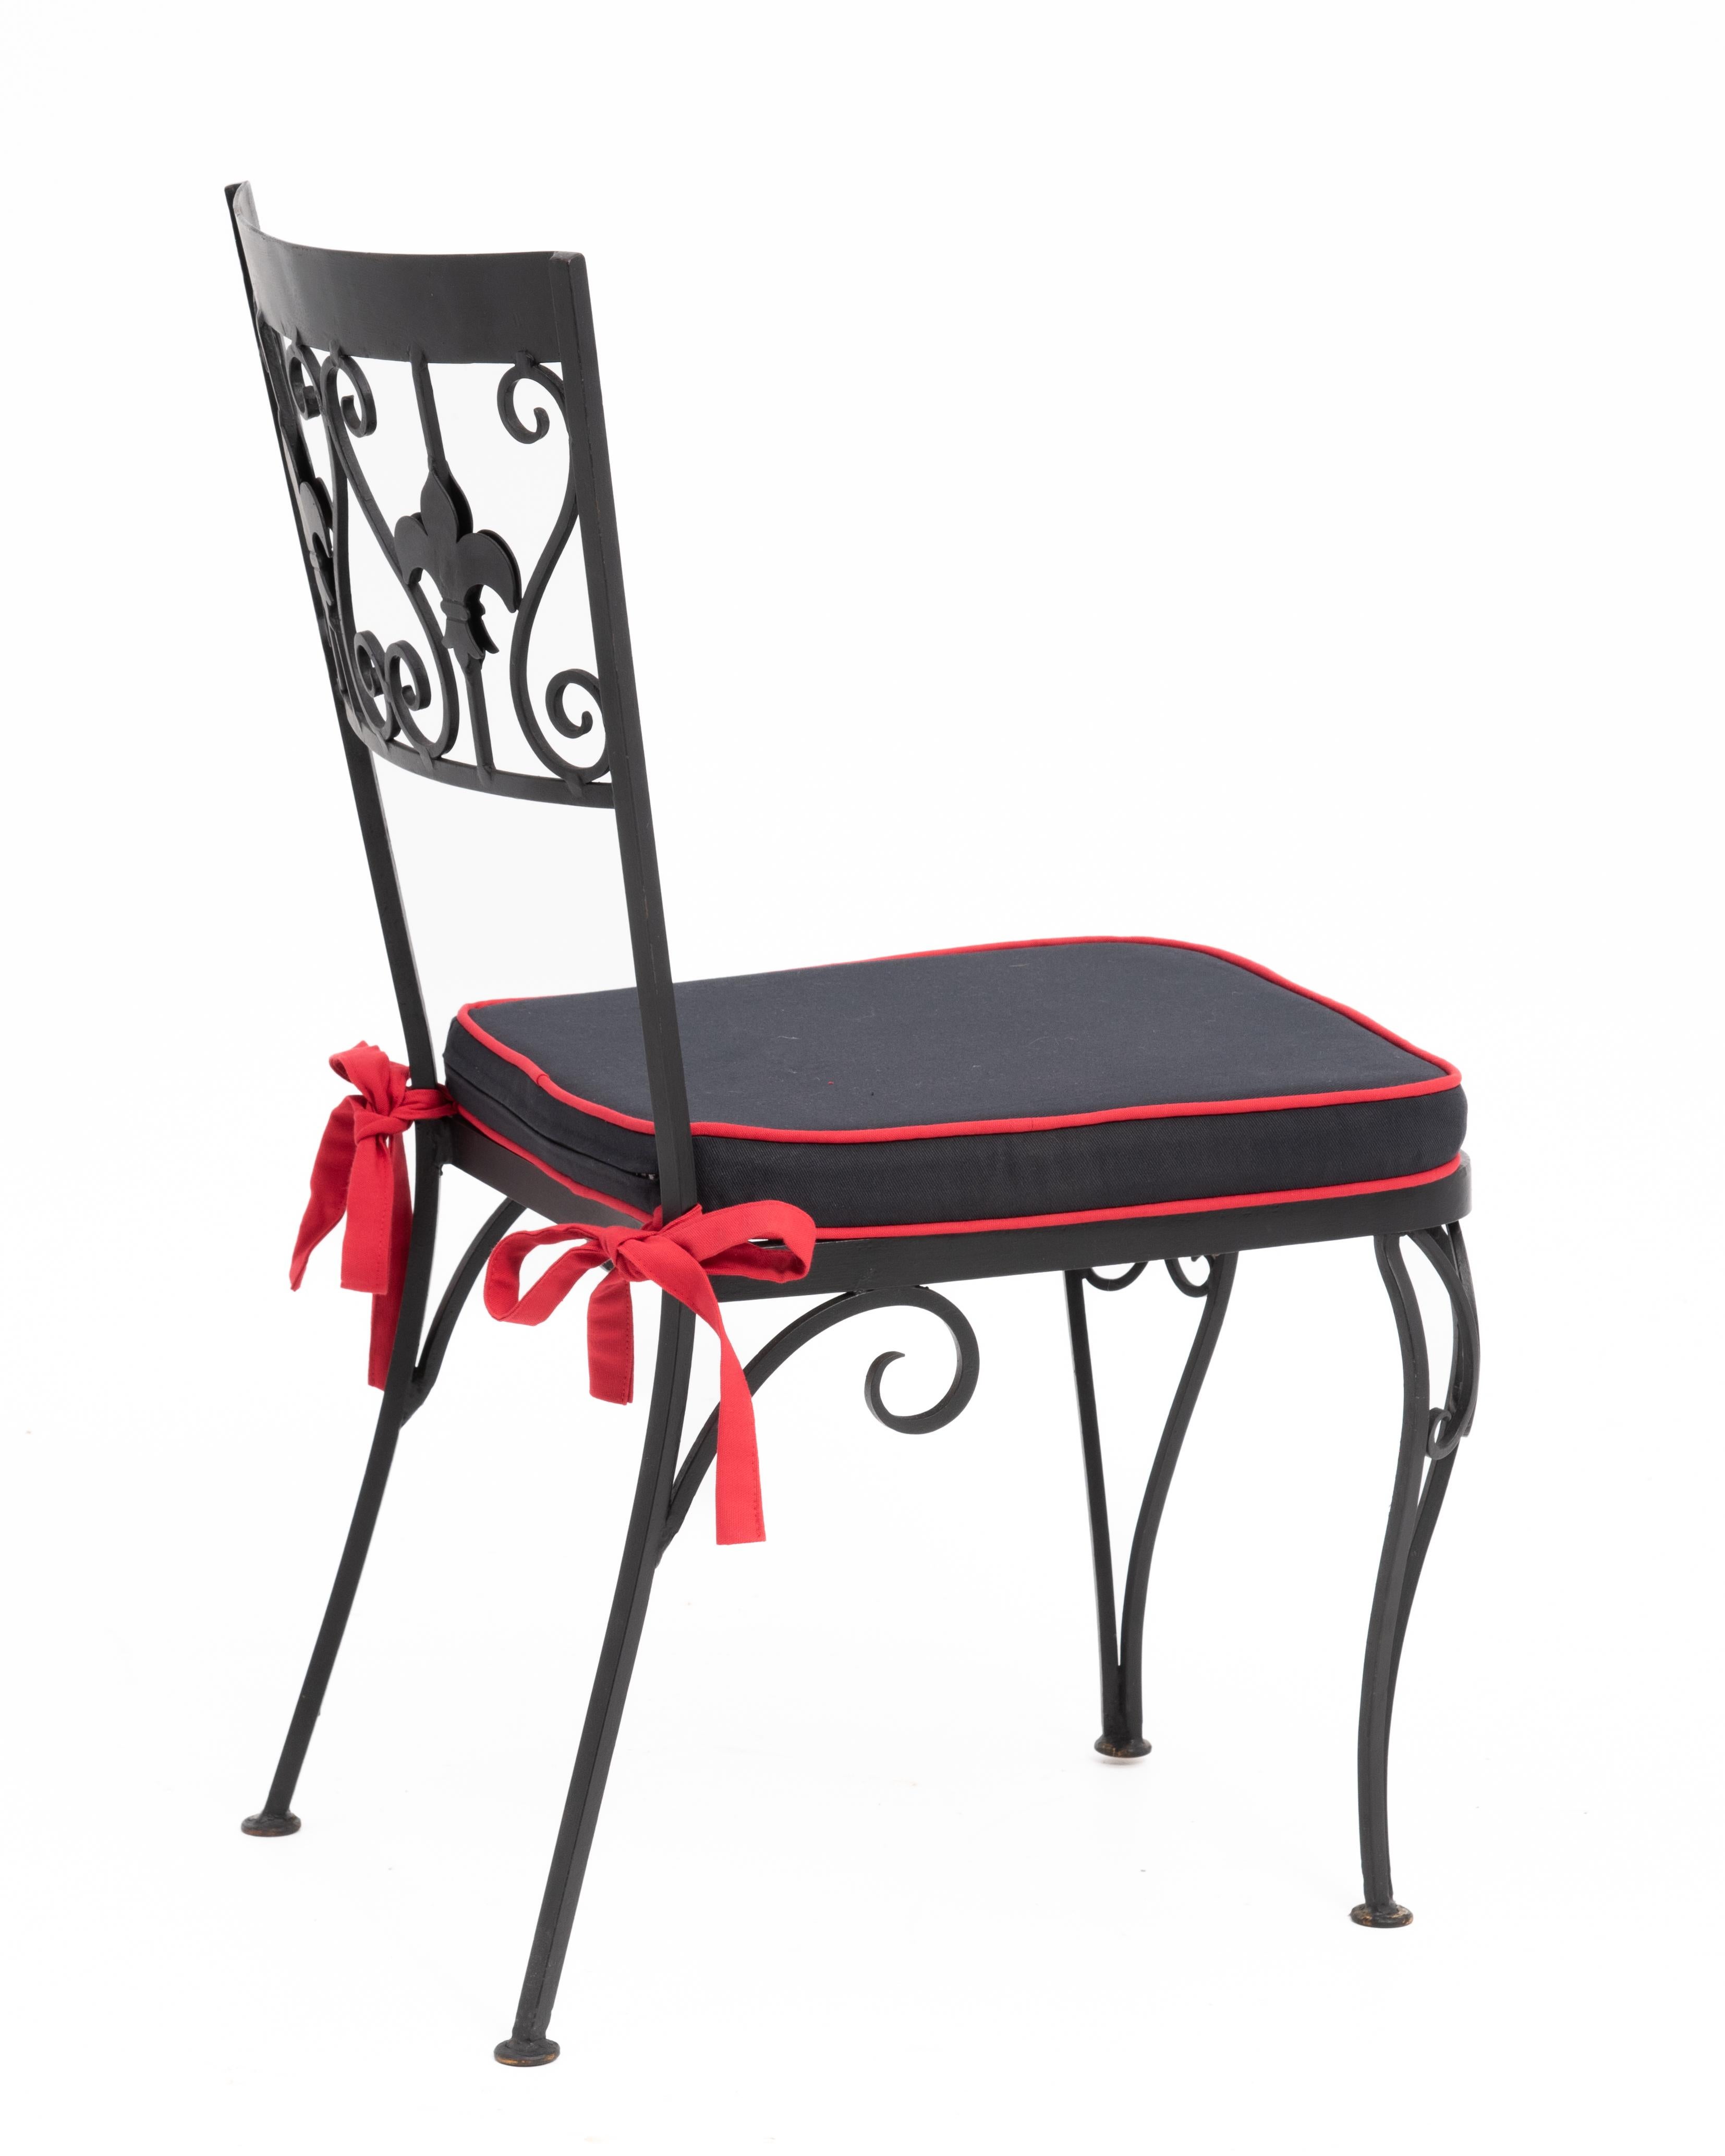 American Hollywood Regency Wrought Iron Fleur-De-Lis Dining Chairs 1960s - a Set of 6 For Sale